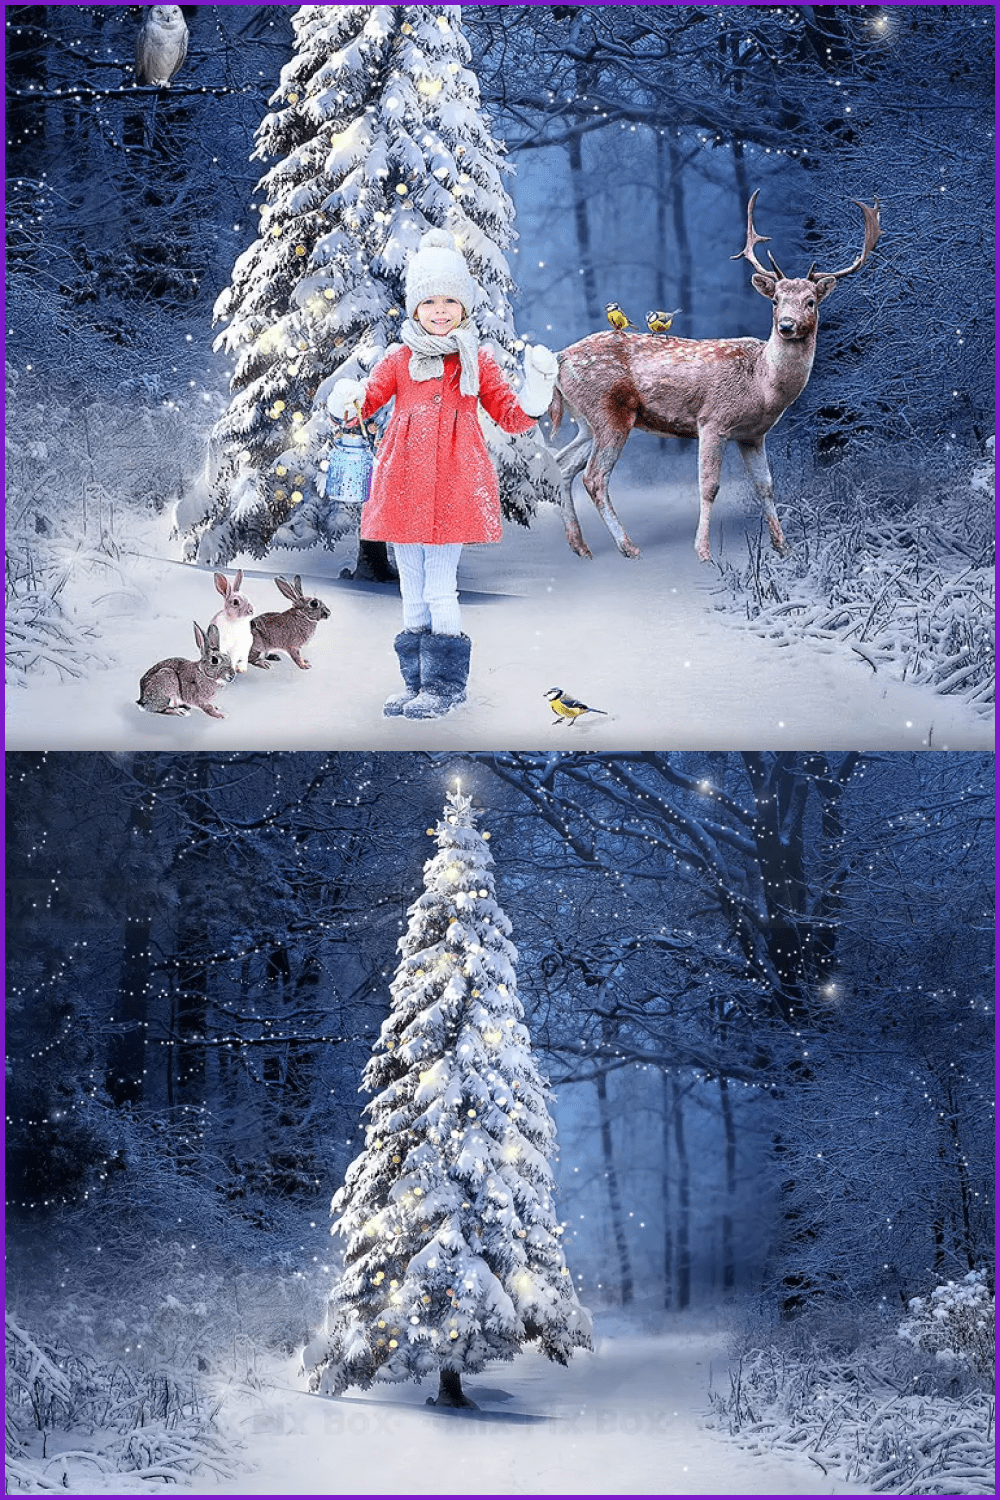 A collage of images of a large snow-covered spruce in the forest with a girl, rabbits and a deer.